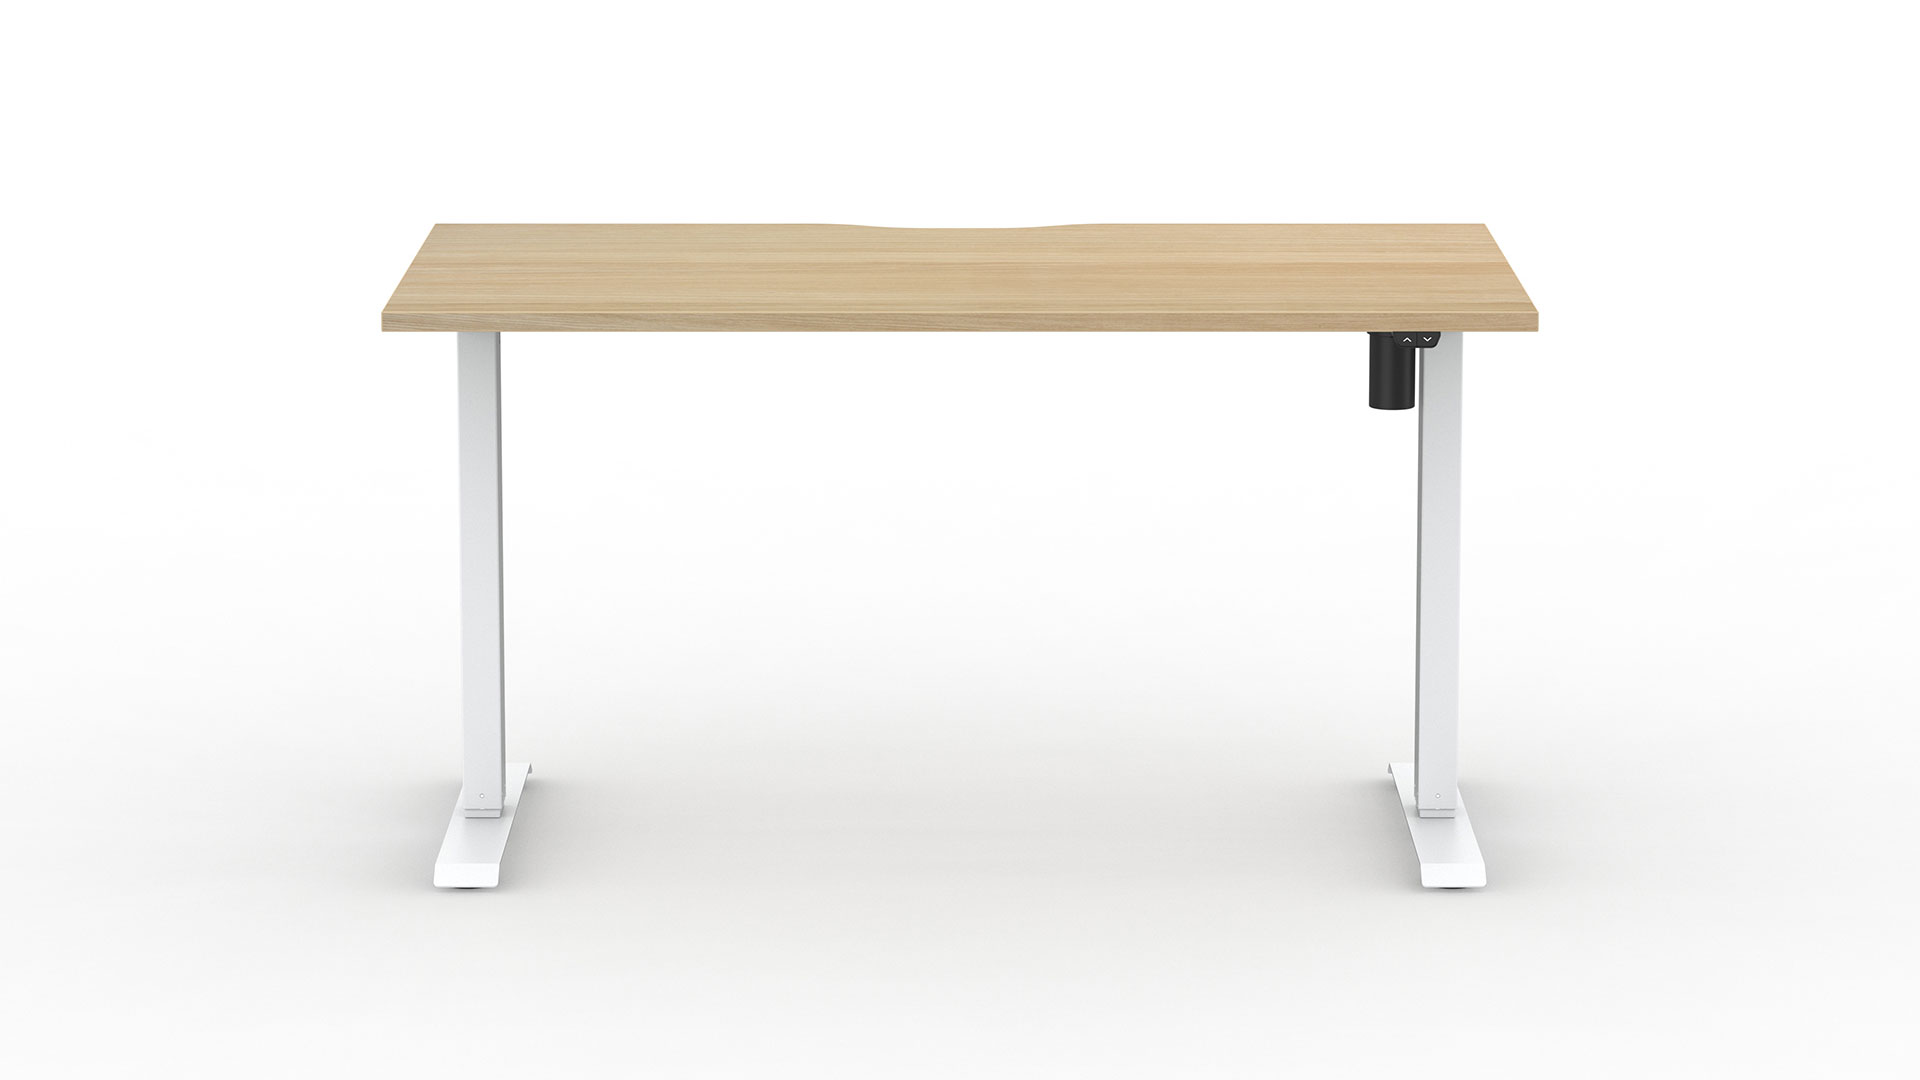 Alto desk frames will accommodate a range of desktop sizes and styles.